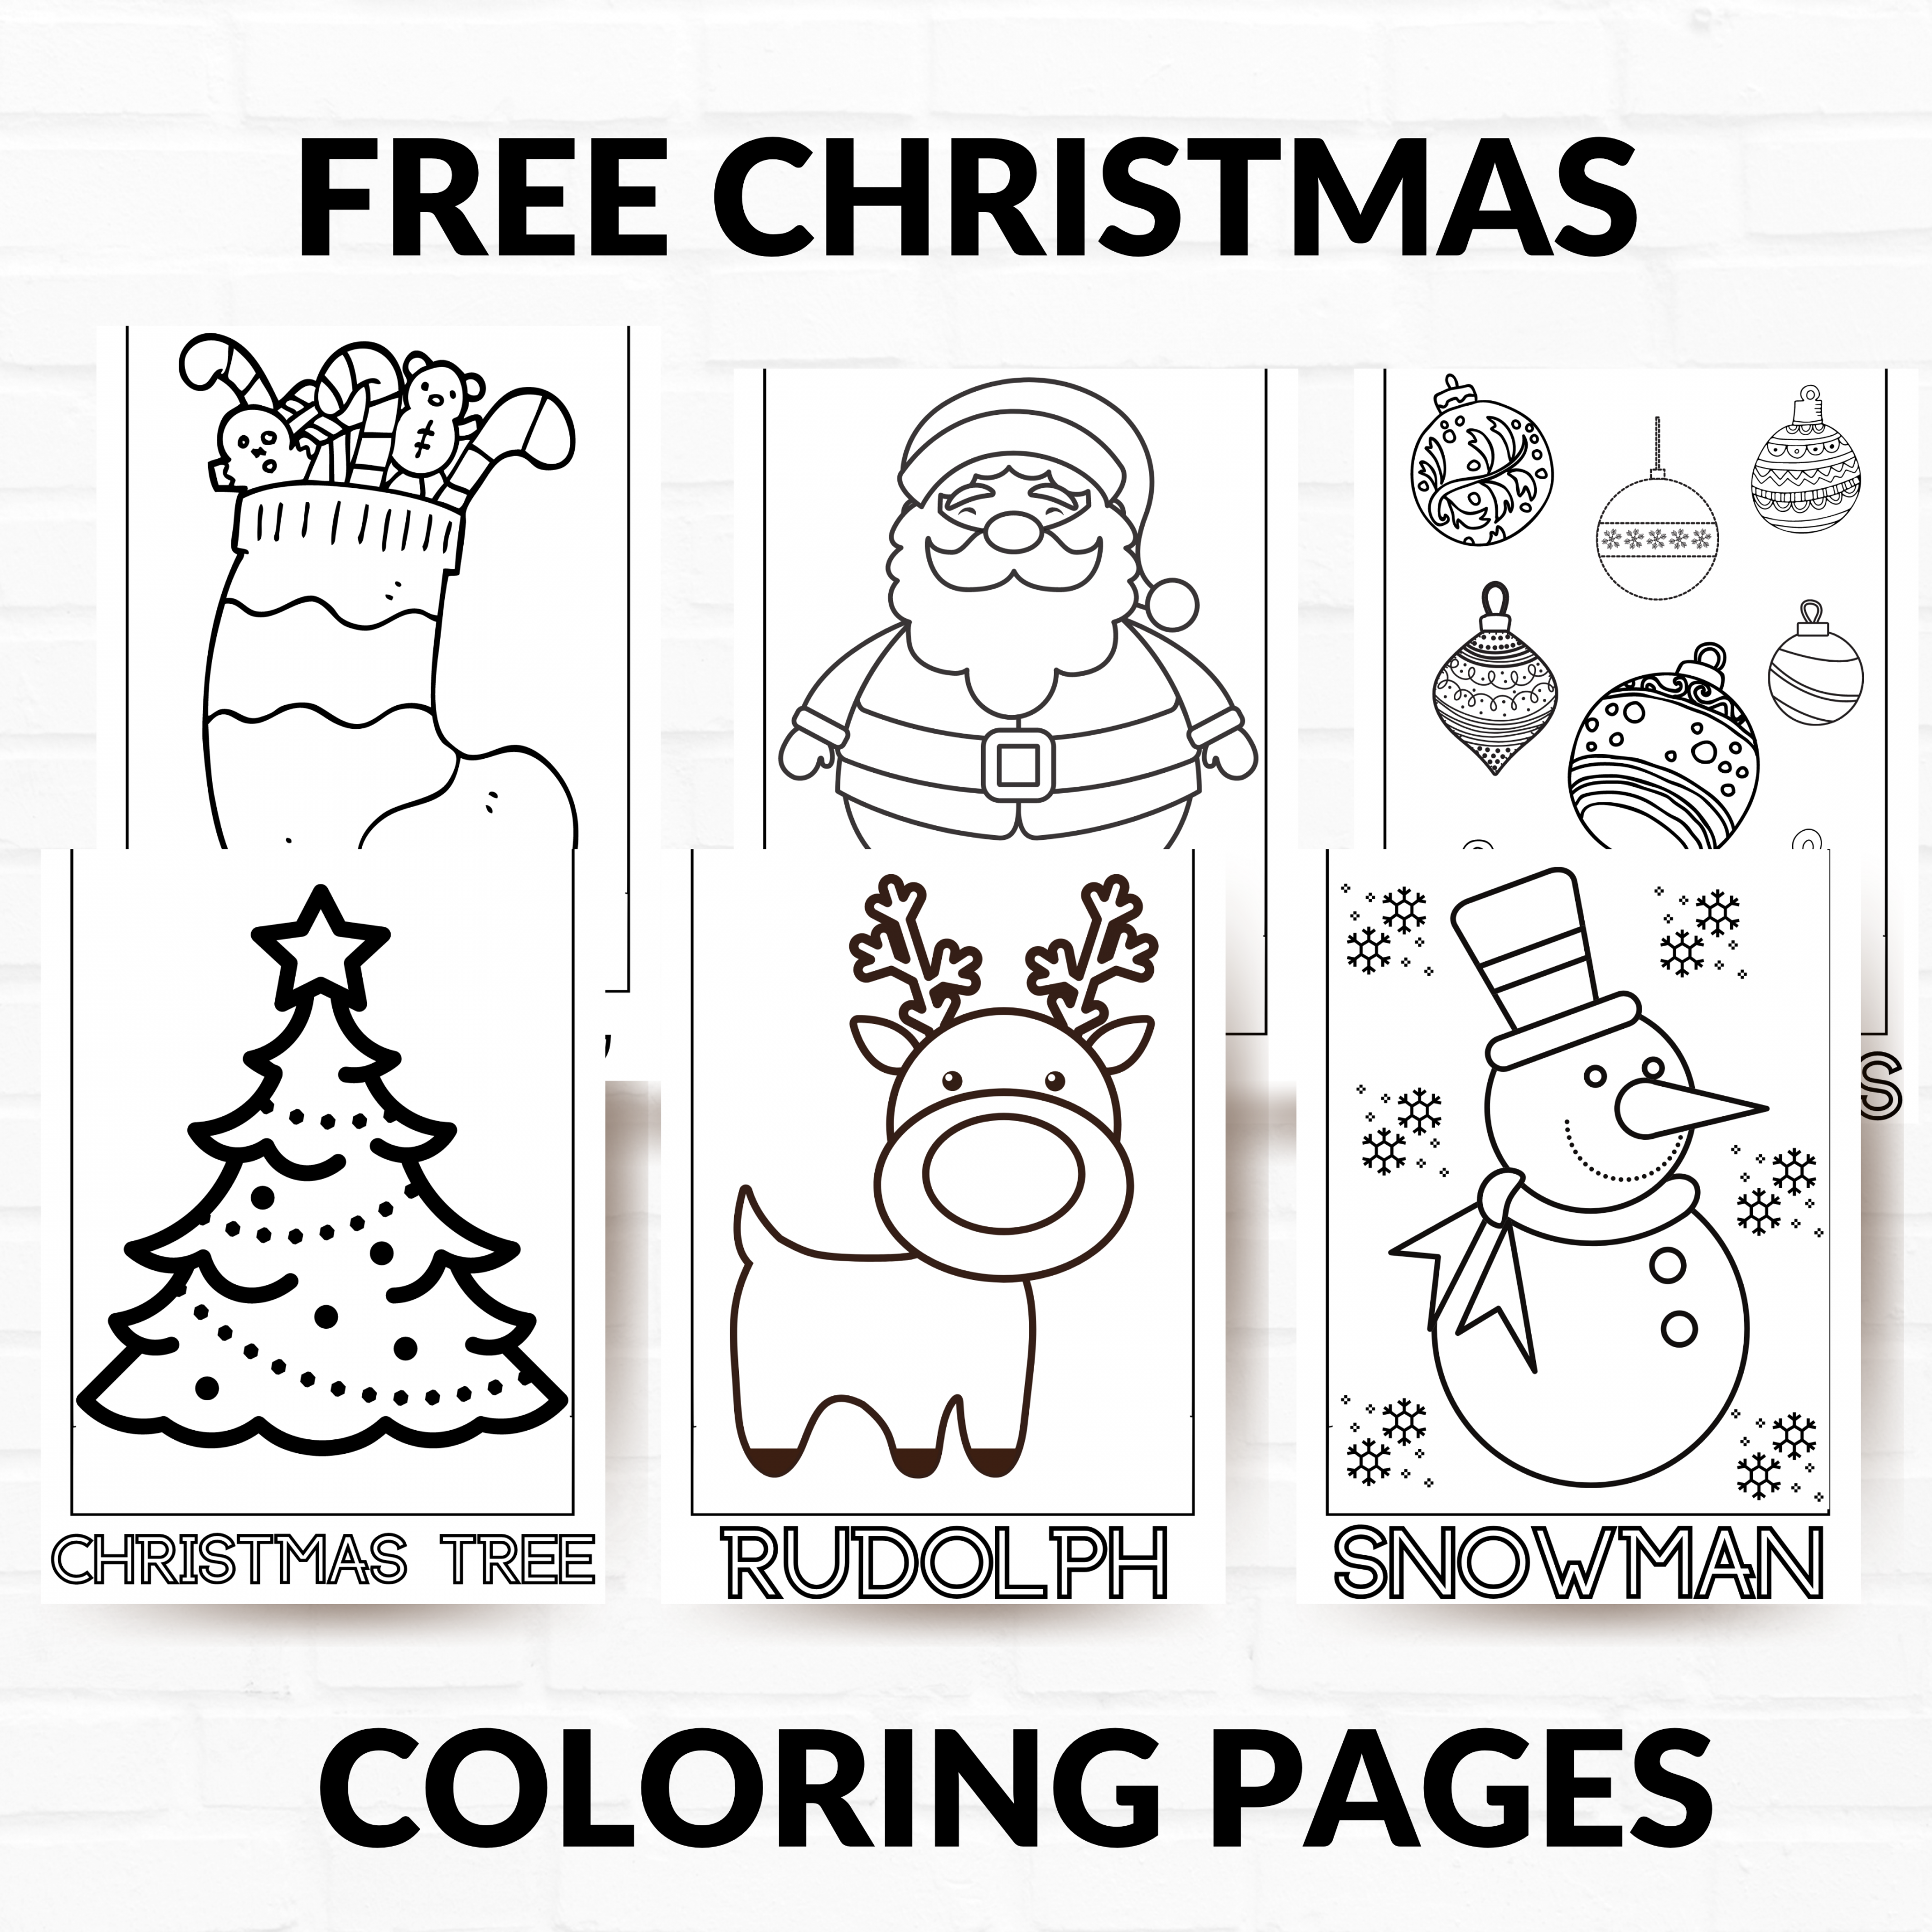 Christmas Free Printables Coloring Pages - Printable - Free Printable Christmas Coloring Pages - About a Mom